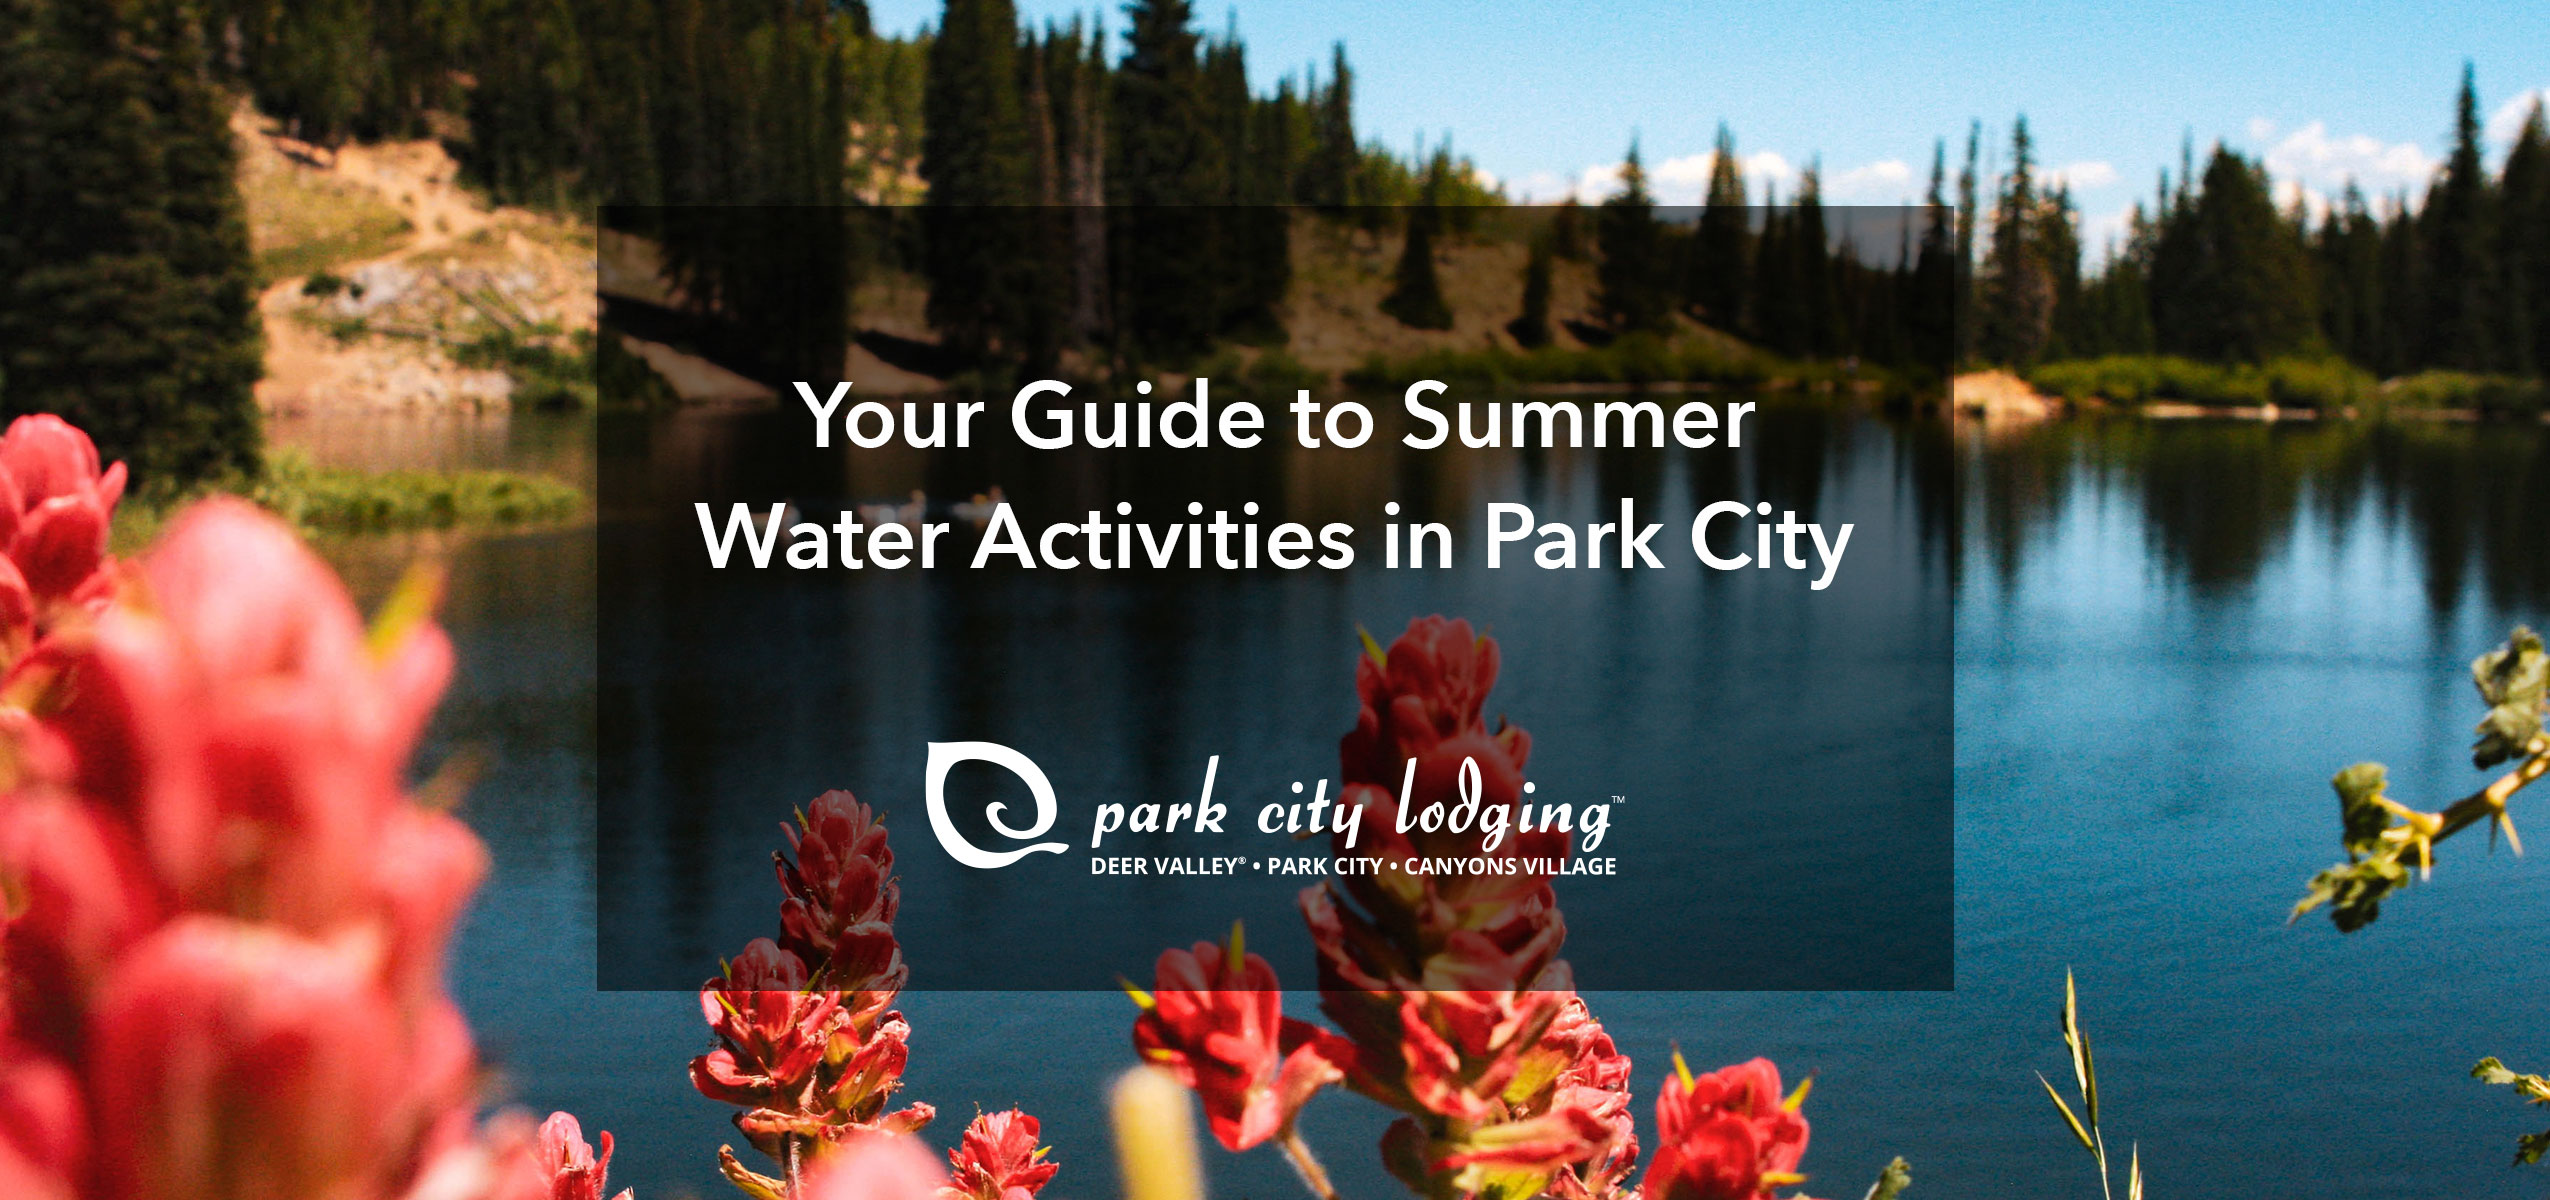 Guide to Summer Water Activities in Park City